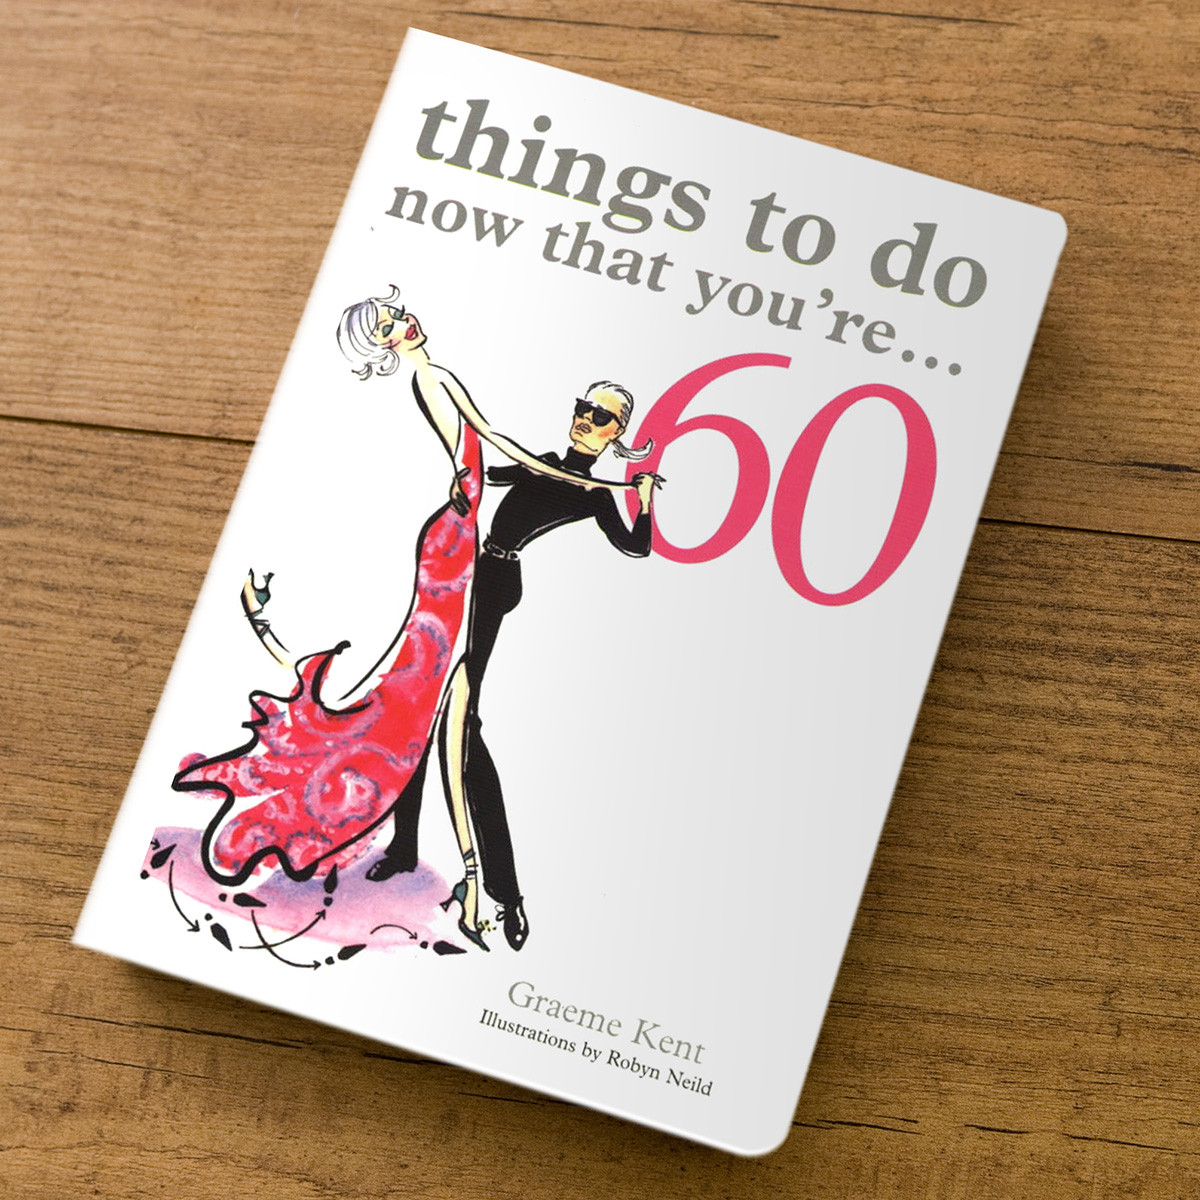 60Th Birthday Gift Ideas
 Things To Do Now That You re 60 Gift Book 60th